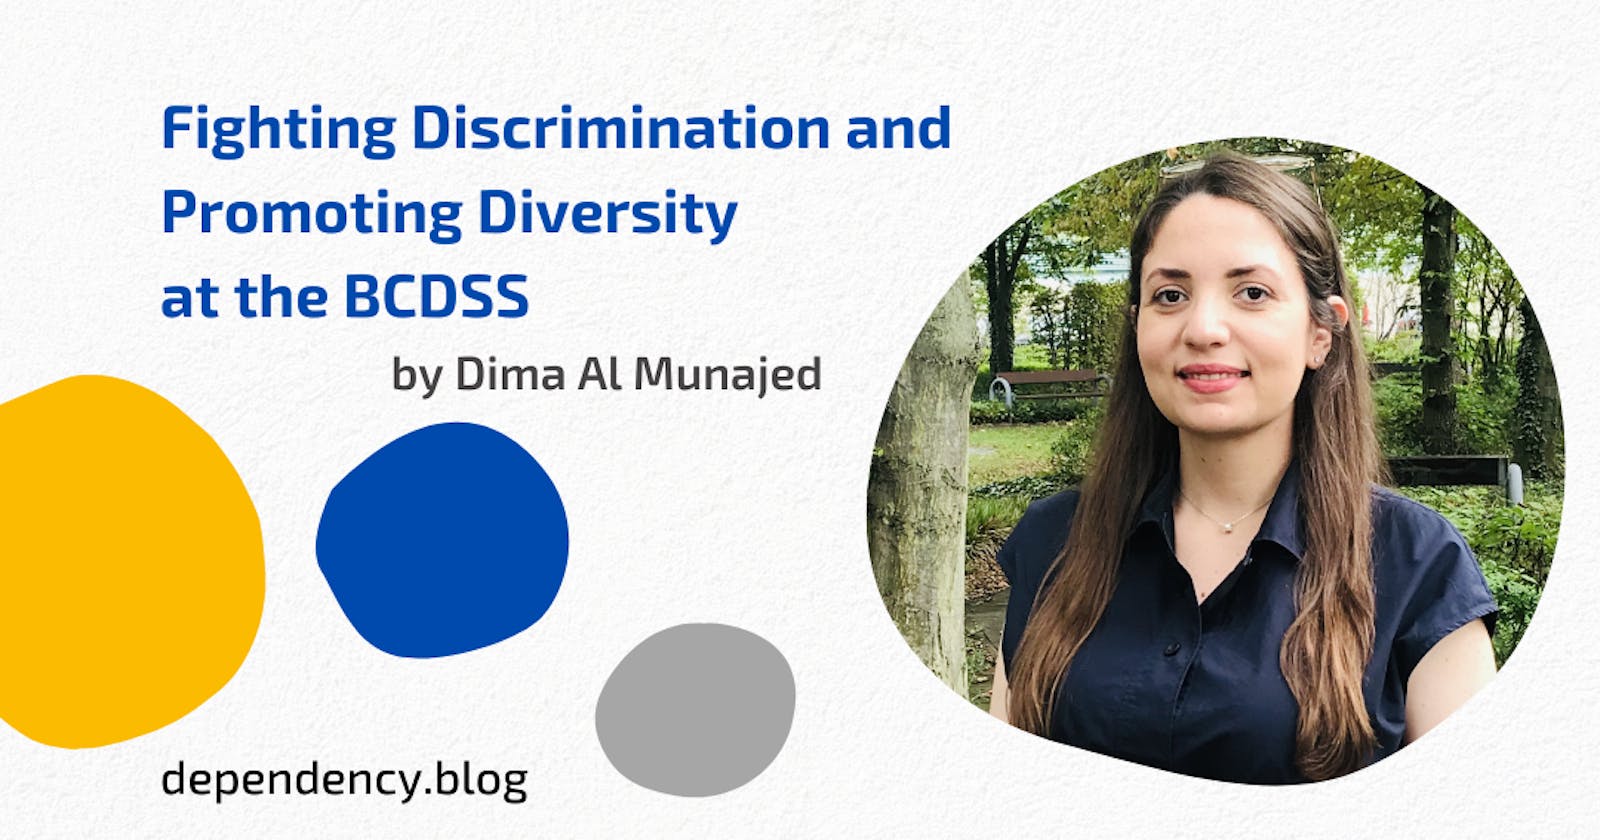 Fighting Discrimination and Promoting Diversity at the BCDSS